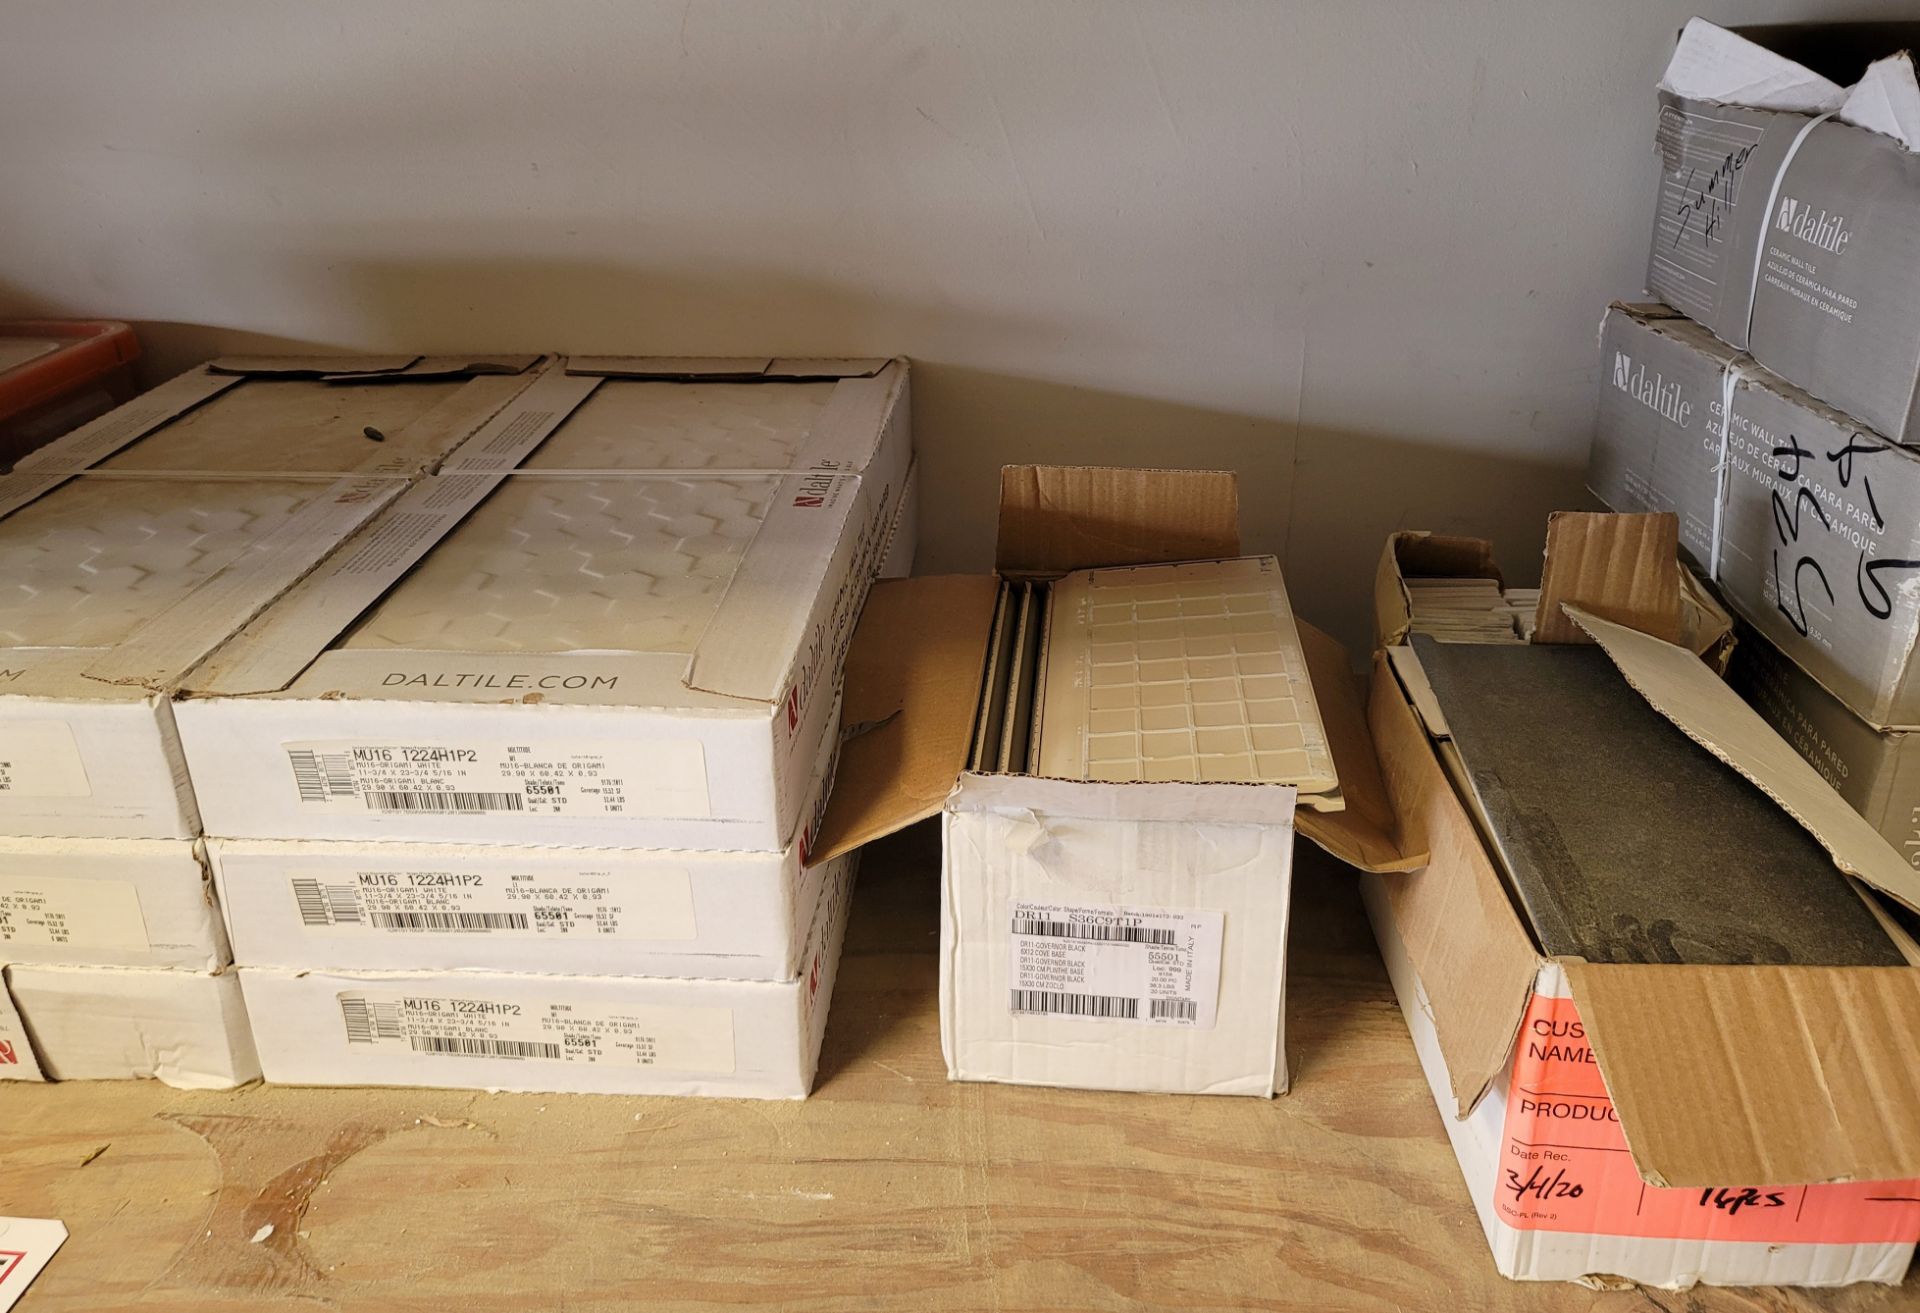 LOT - CONTENTS OF 11' SHELF FULL OF TILE AND TILE INSTALLATION ITEMS (LOCATION: SAN DIEGO, CA) - Image 3 of 6